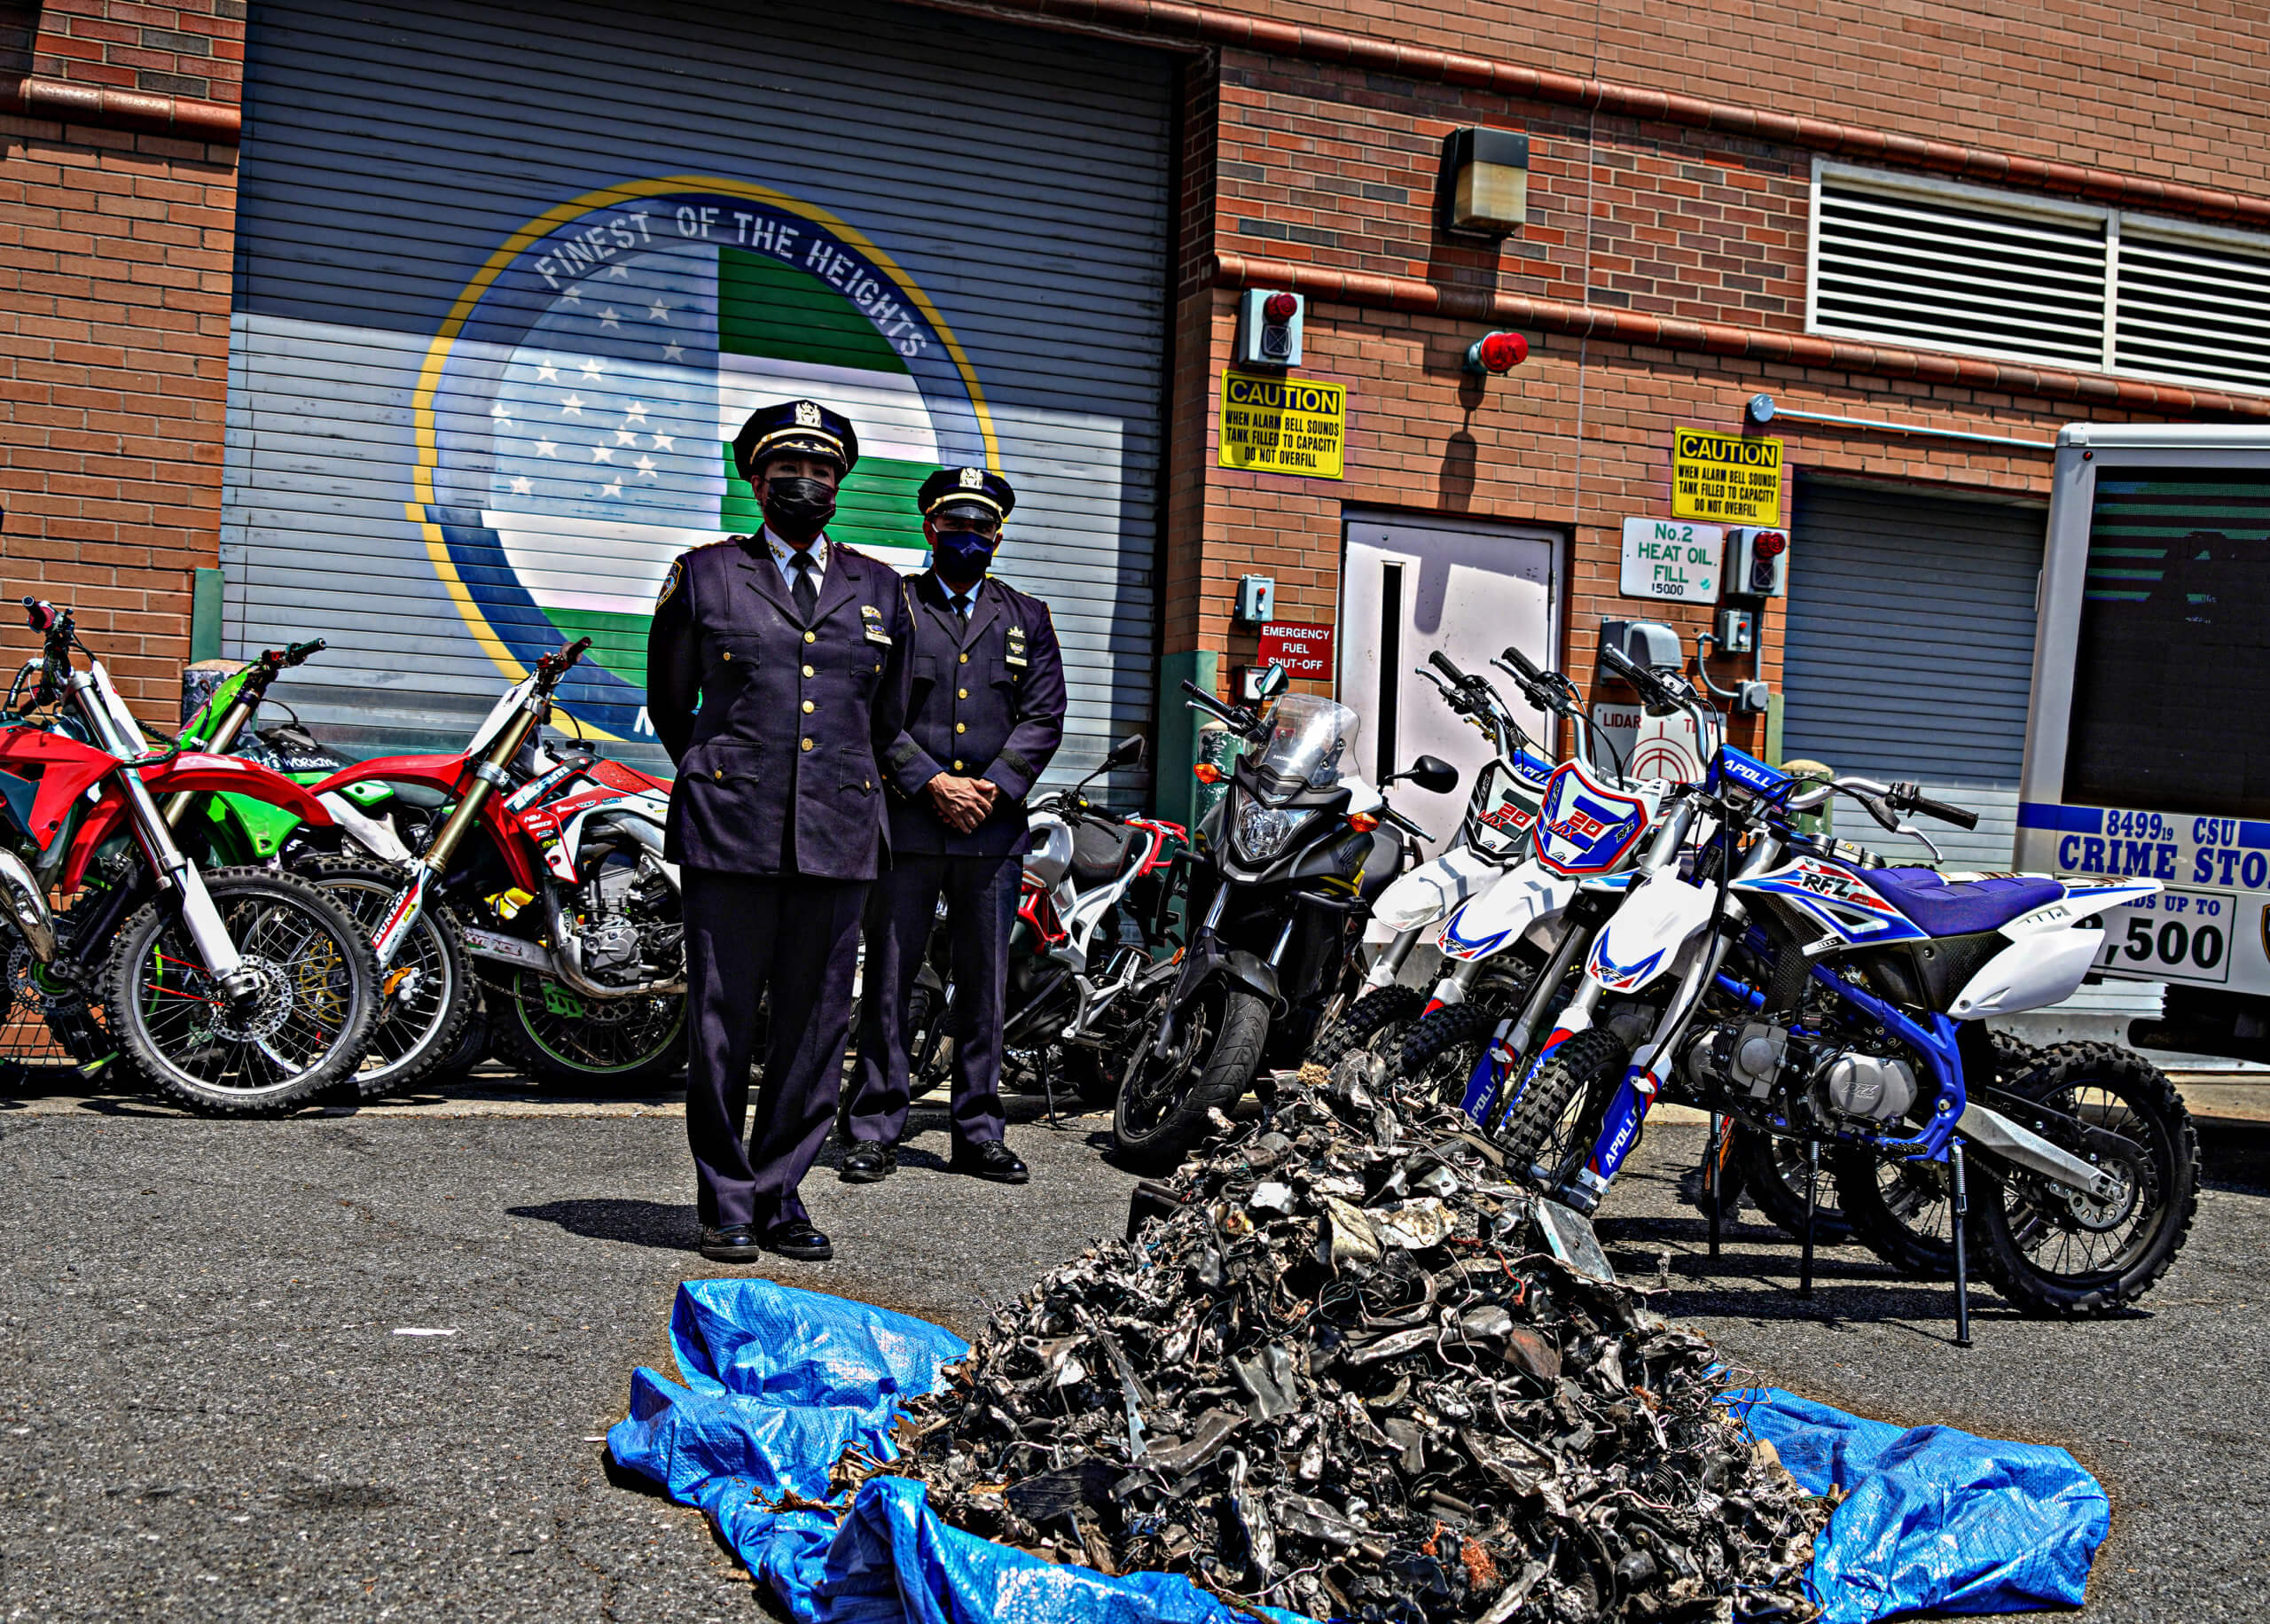 Scrapped Nypd Says They Will Crush Illegal Bikes And Atvs This Summer In Street Safety Campaign Amnewyork